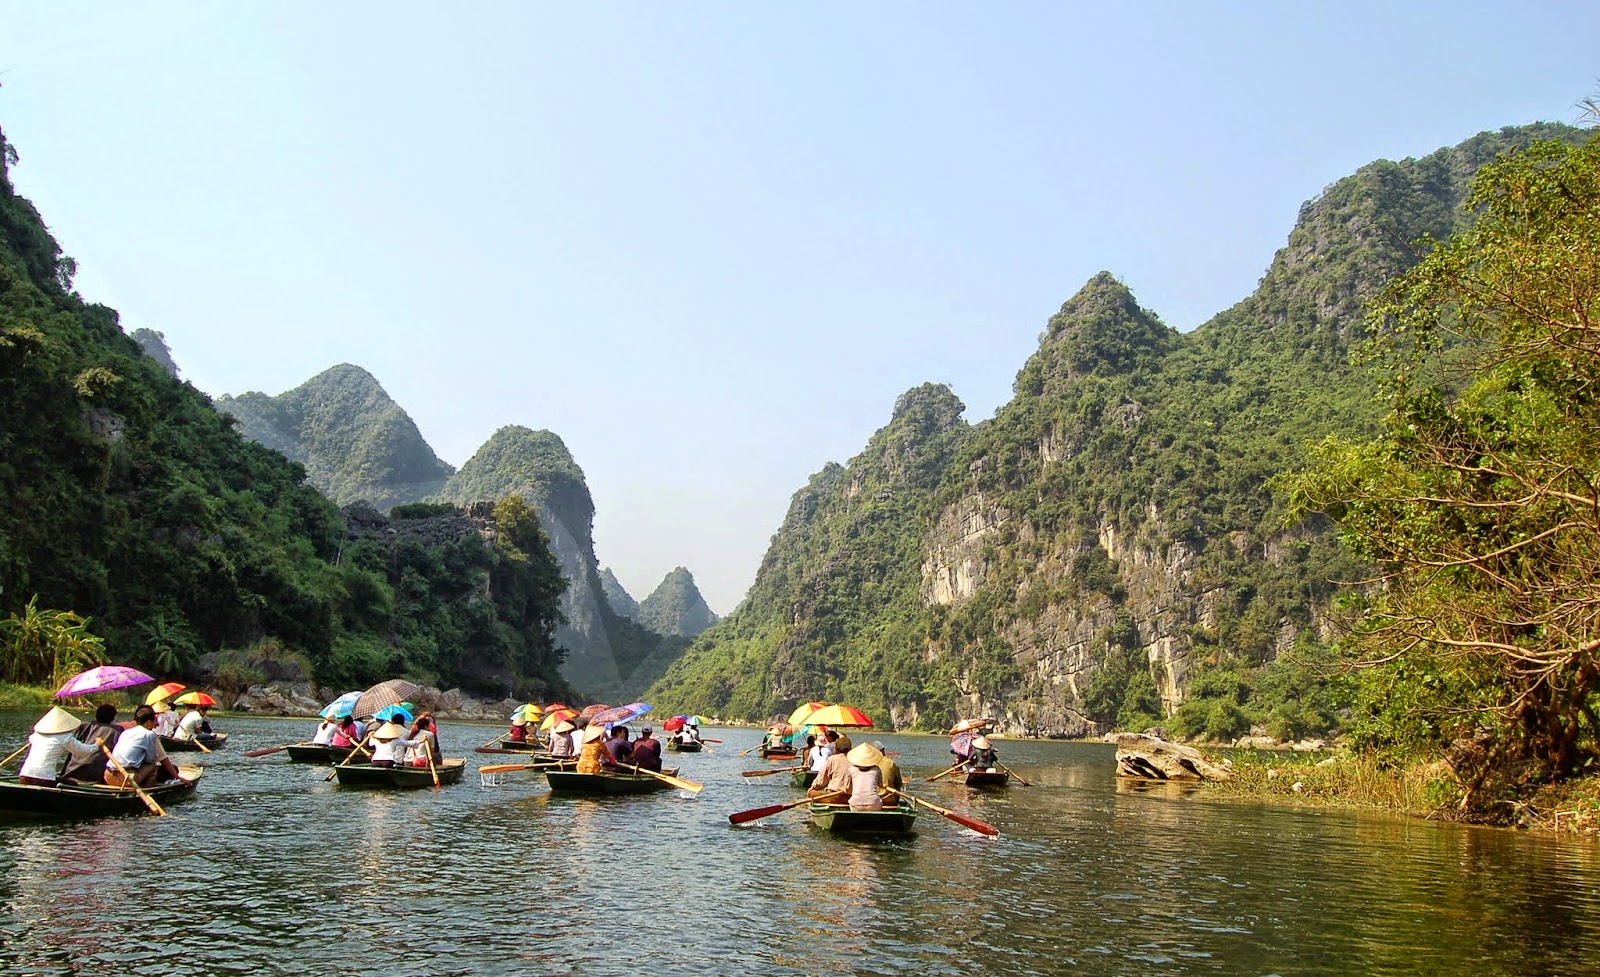 Adventure tourists enjoy pushing it to the limit in scenic Ninh Bình